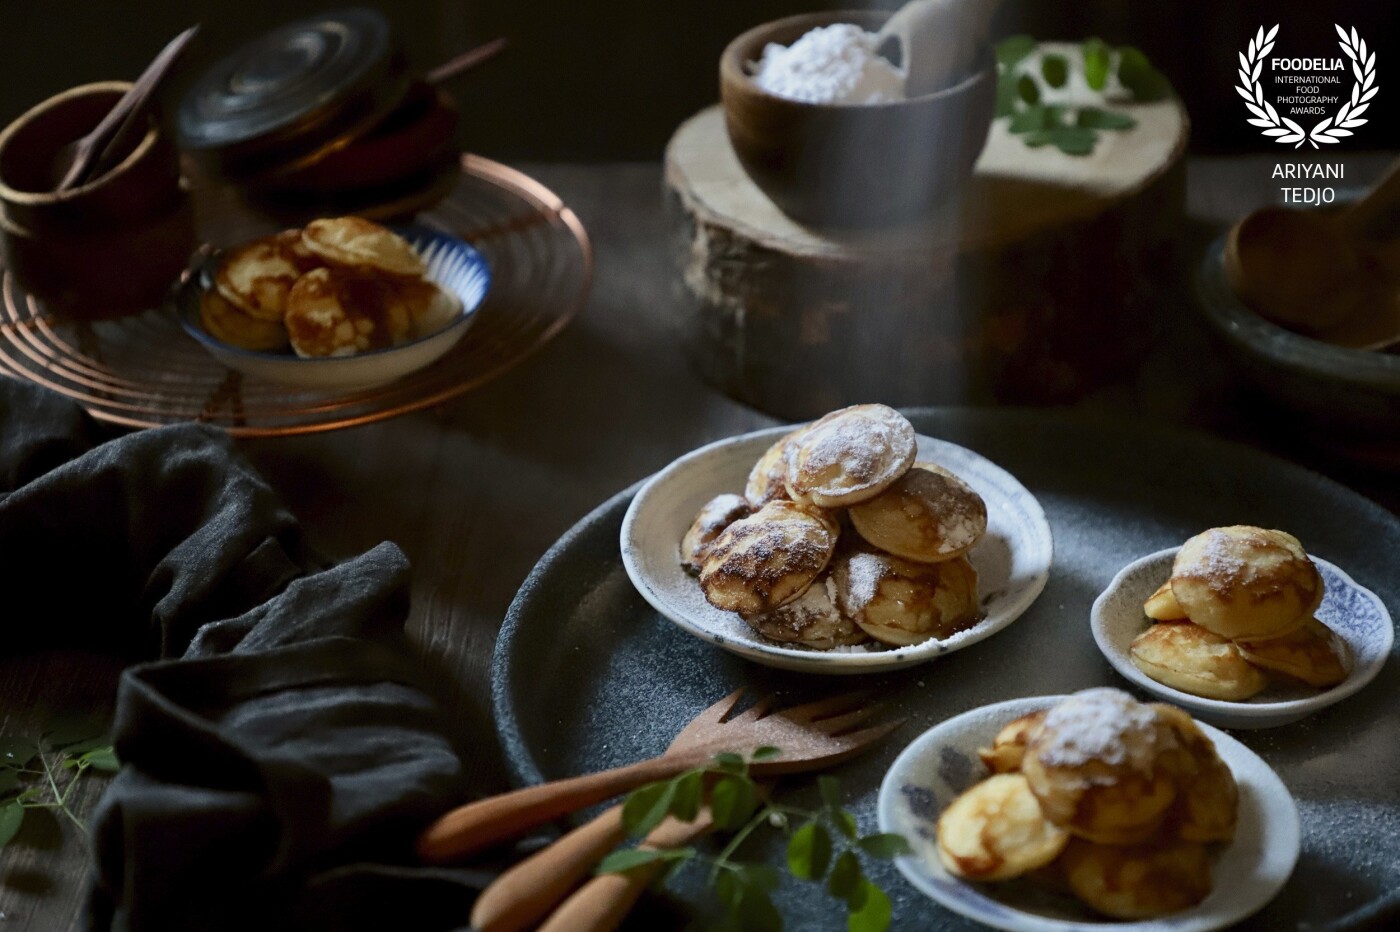 Sugaring the Poffertjes.  This little snack is a favorite in the family. Originated and popular in the Netherlands, it is also popular in Indonesia as a former Dutch colony. <br />
<br />
The poffertjes are plated in several small plates in various sizes and styled in a moody dark scene. 